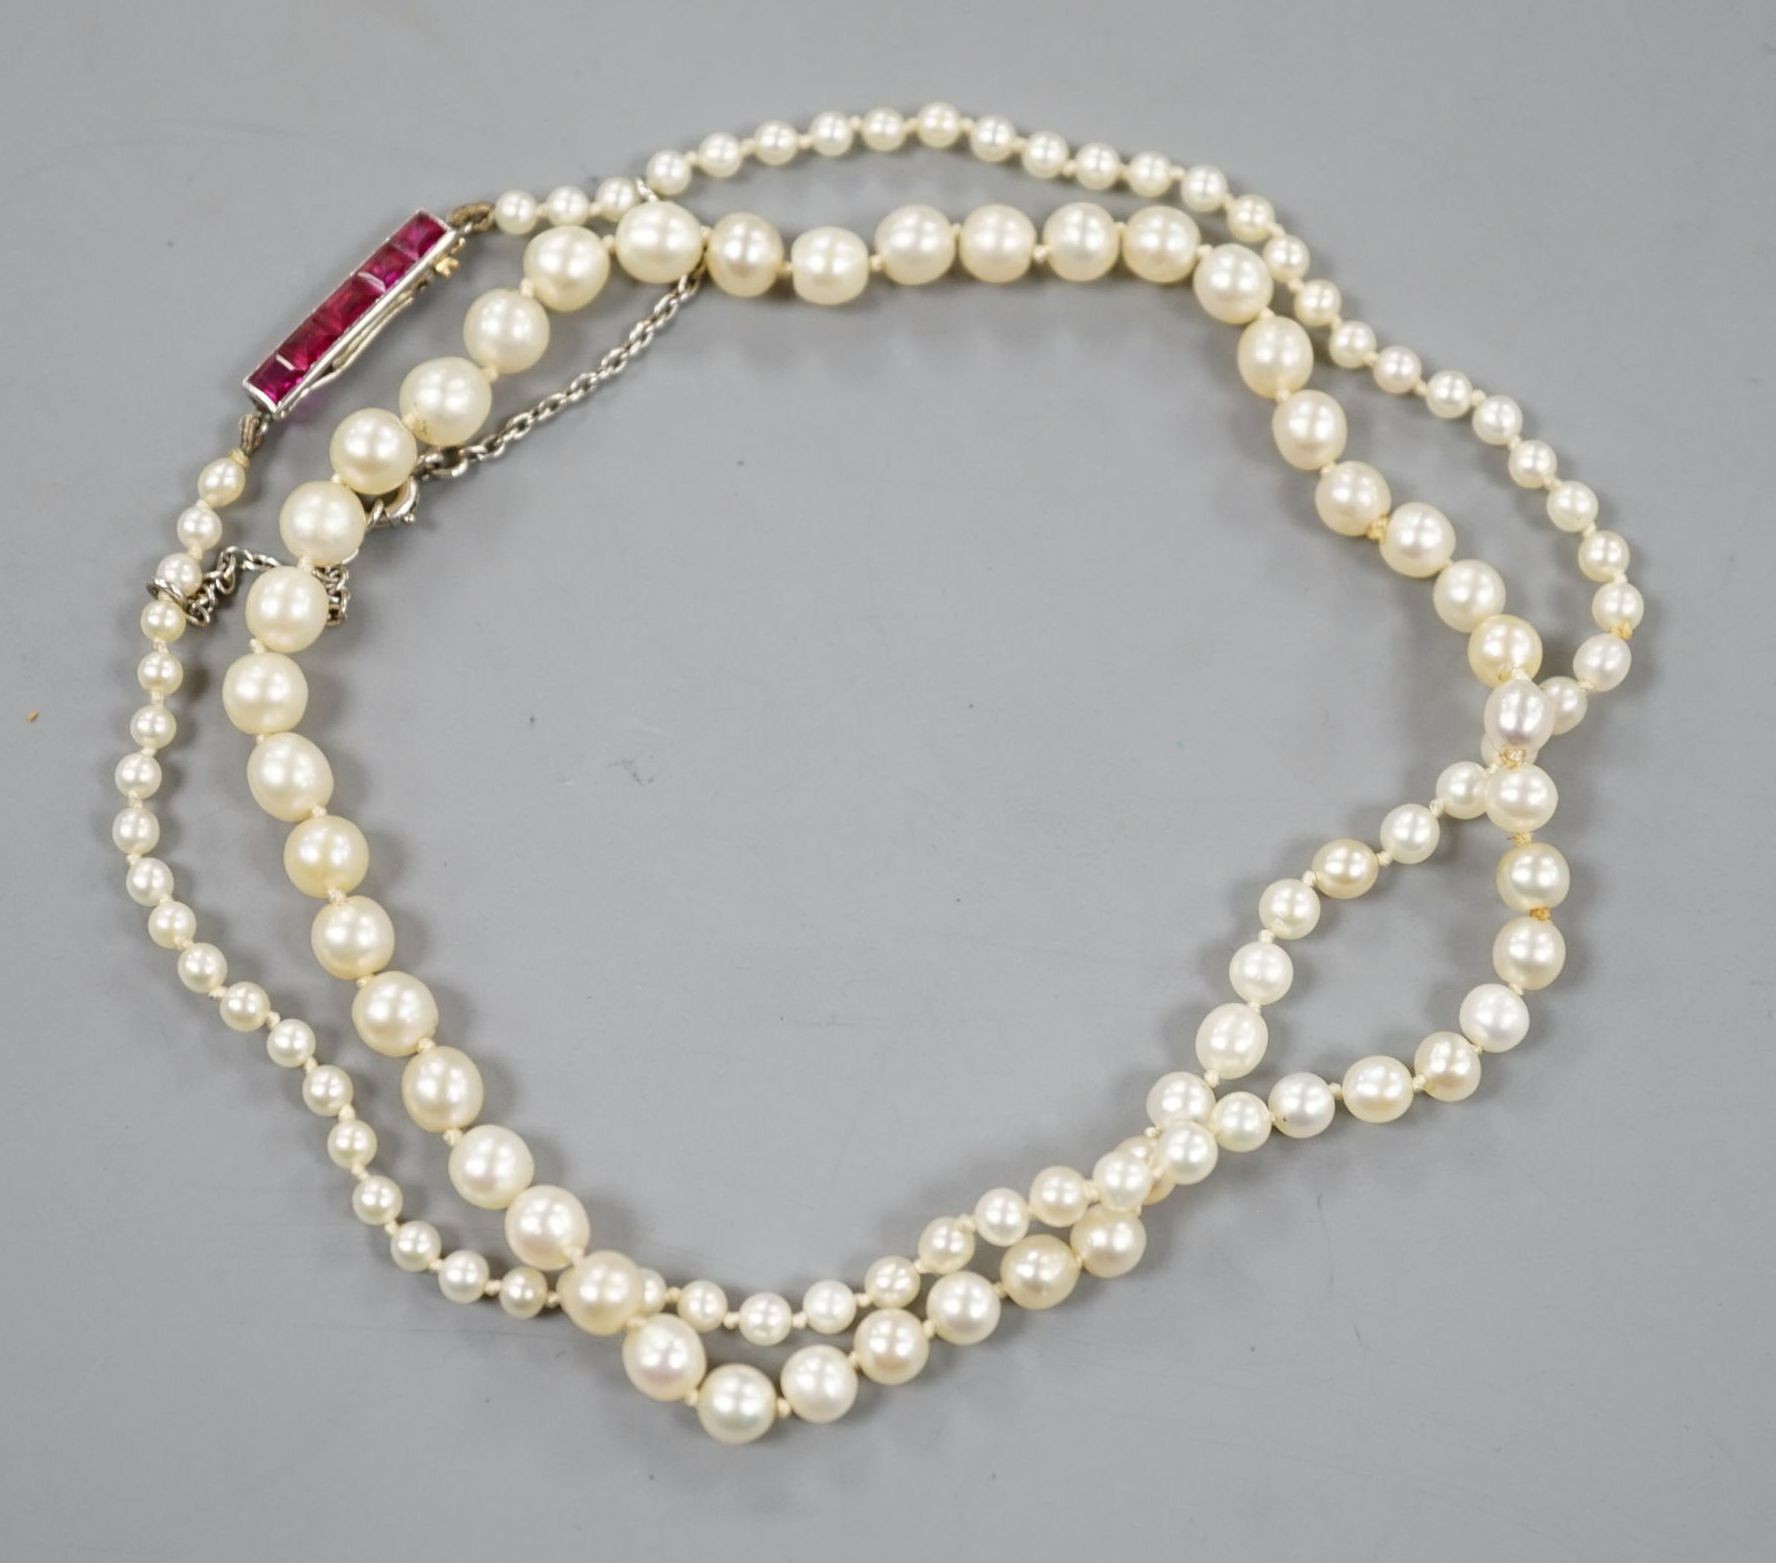 An early 20th century single strand graduated pearl necklace(pearls have not been tested as to whether or not they are natural), five stone ruby set yellow metal clasp, 44cm, gross weight 8.7 grams